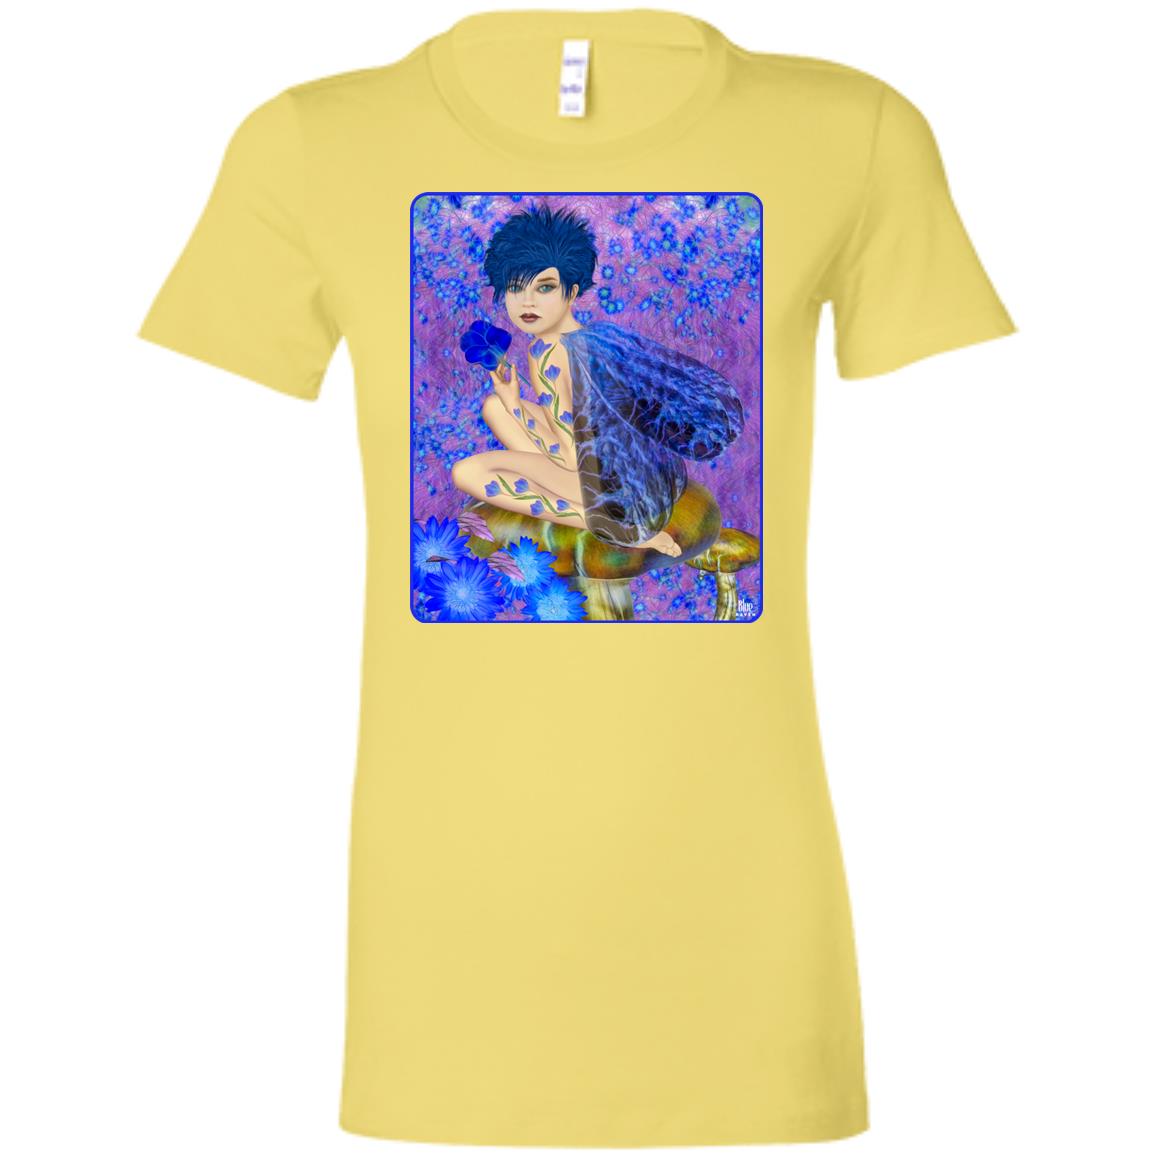 Blue Fairy - Women's Fitted T-Shirt